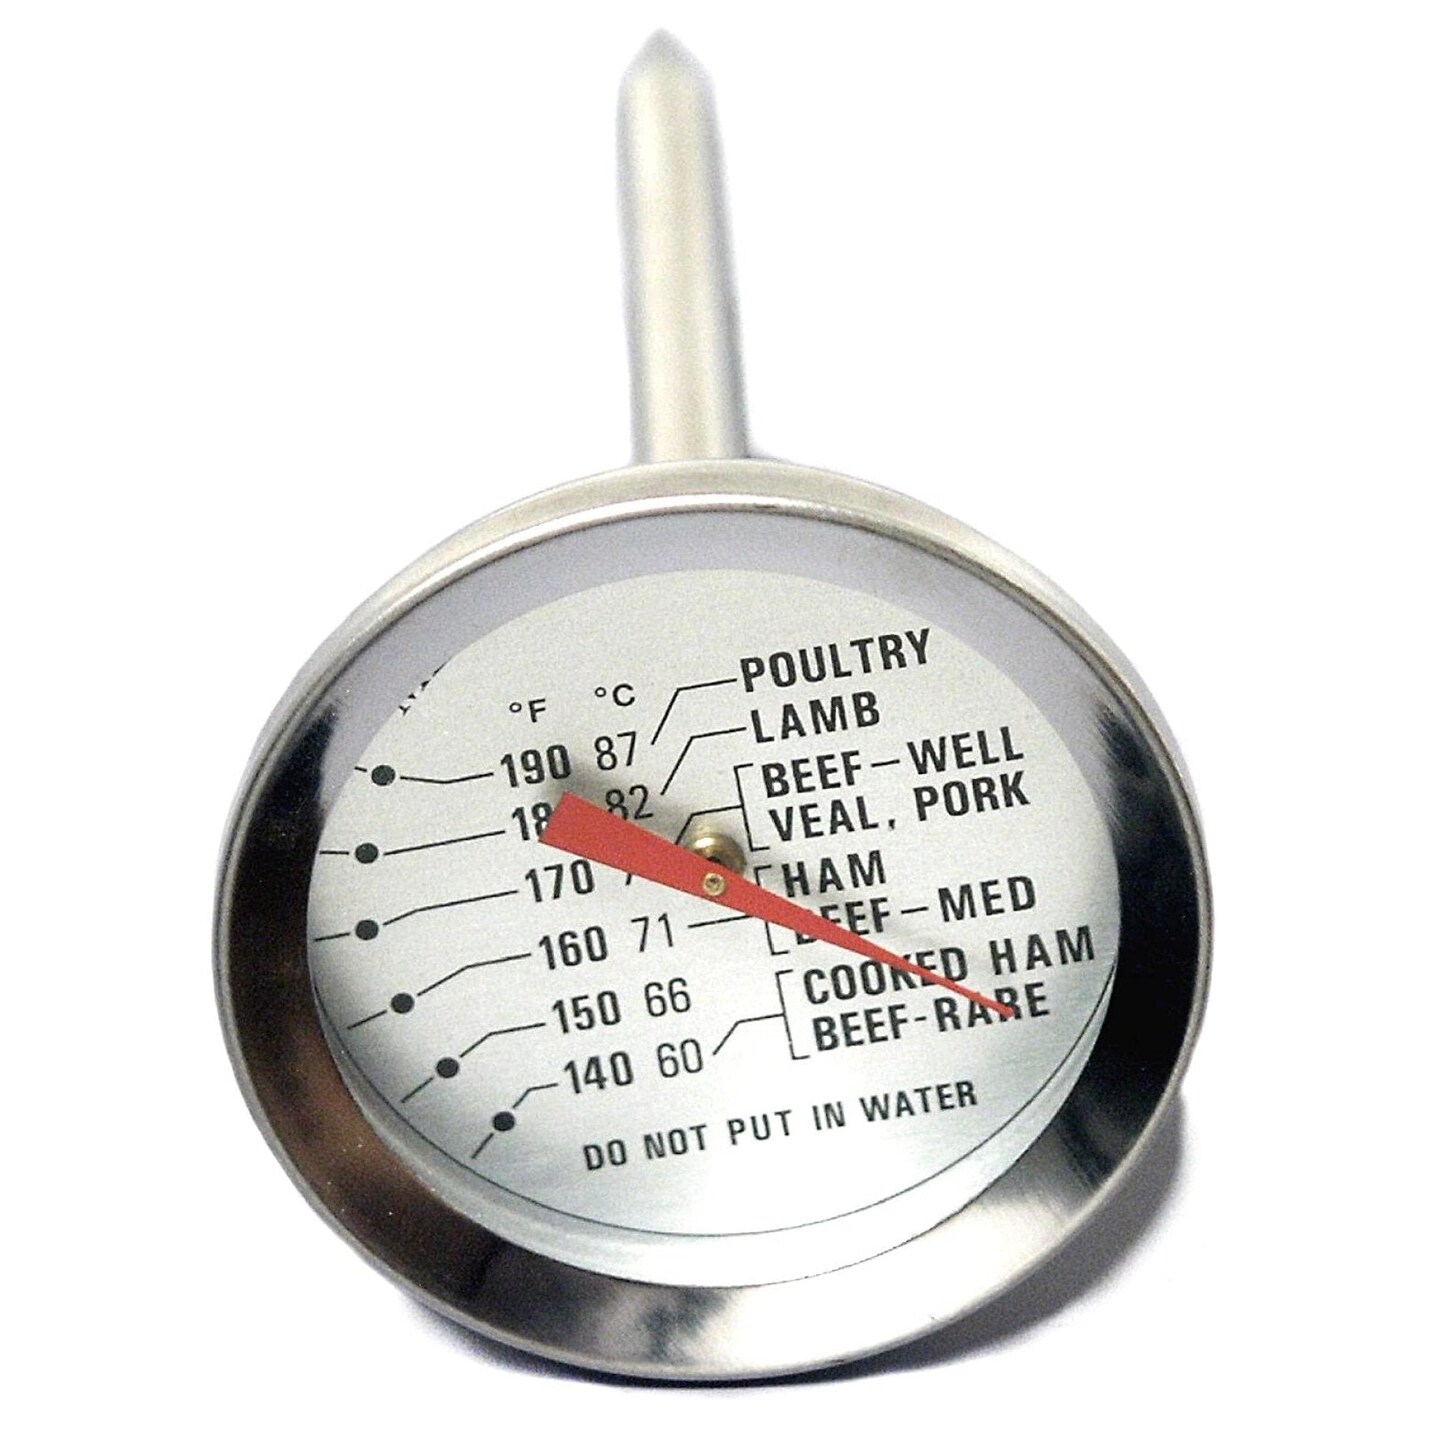 Large Dial A/C Thermometer